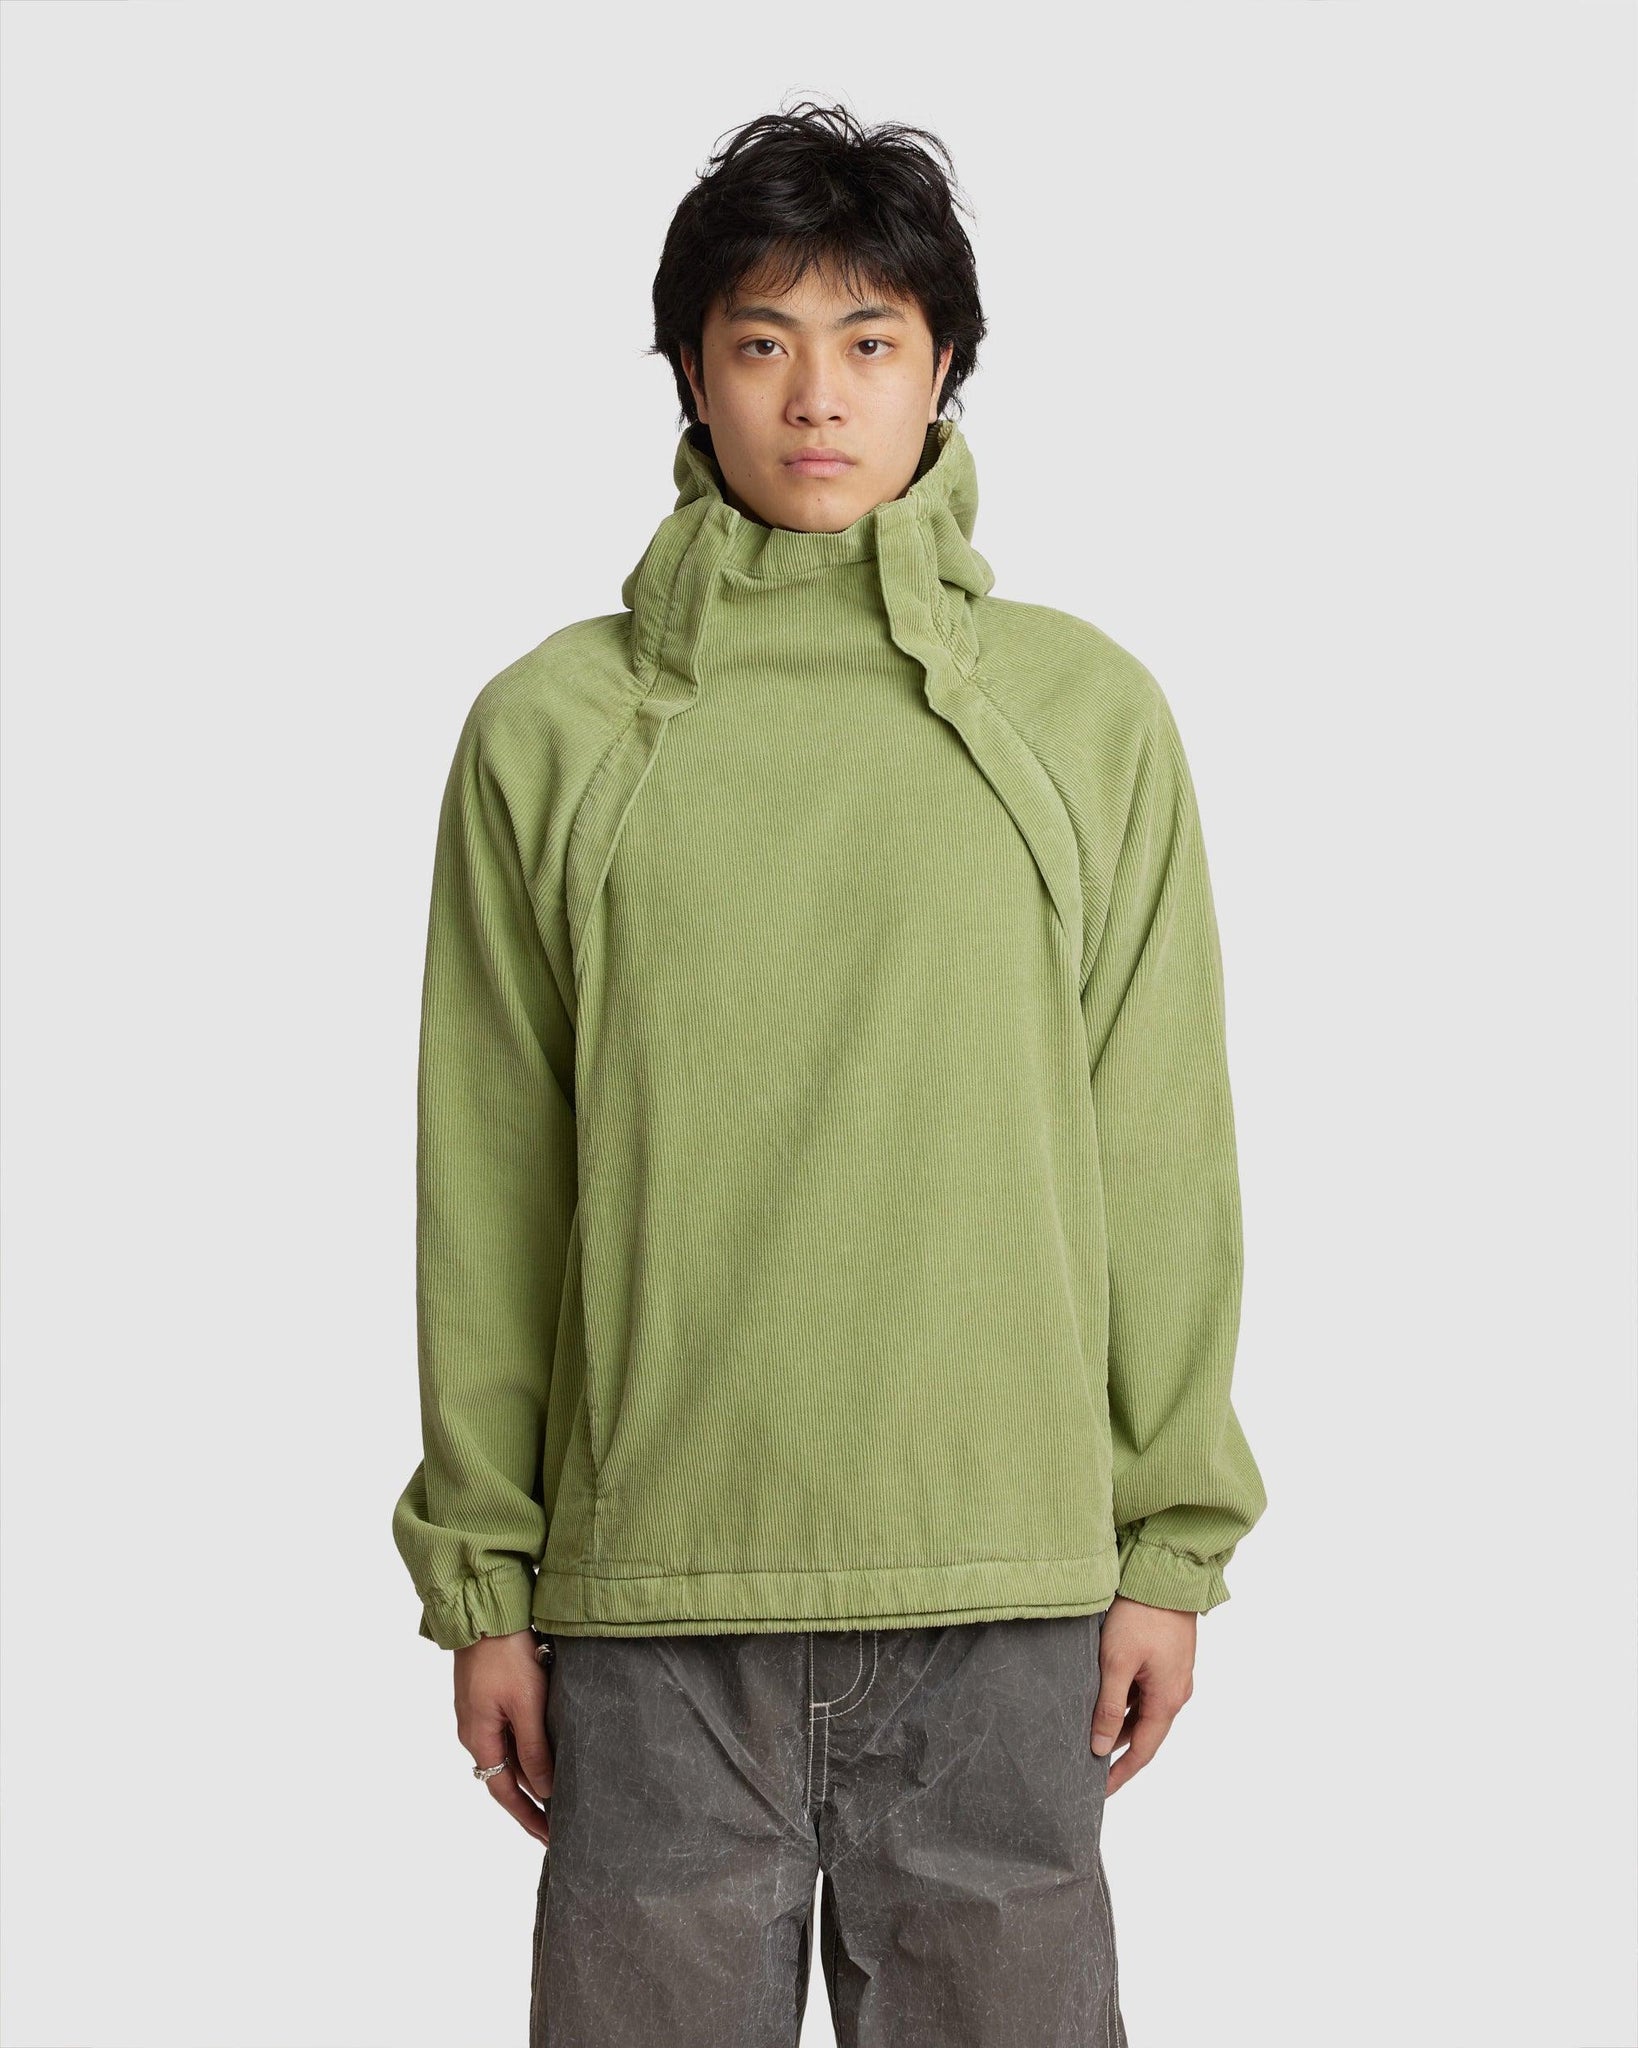 Klifur Hooded Jacket Sage - {{ collection.title }} - Chinatown Country Club 